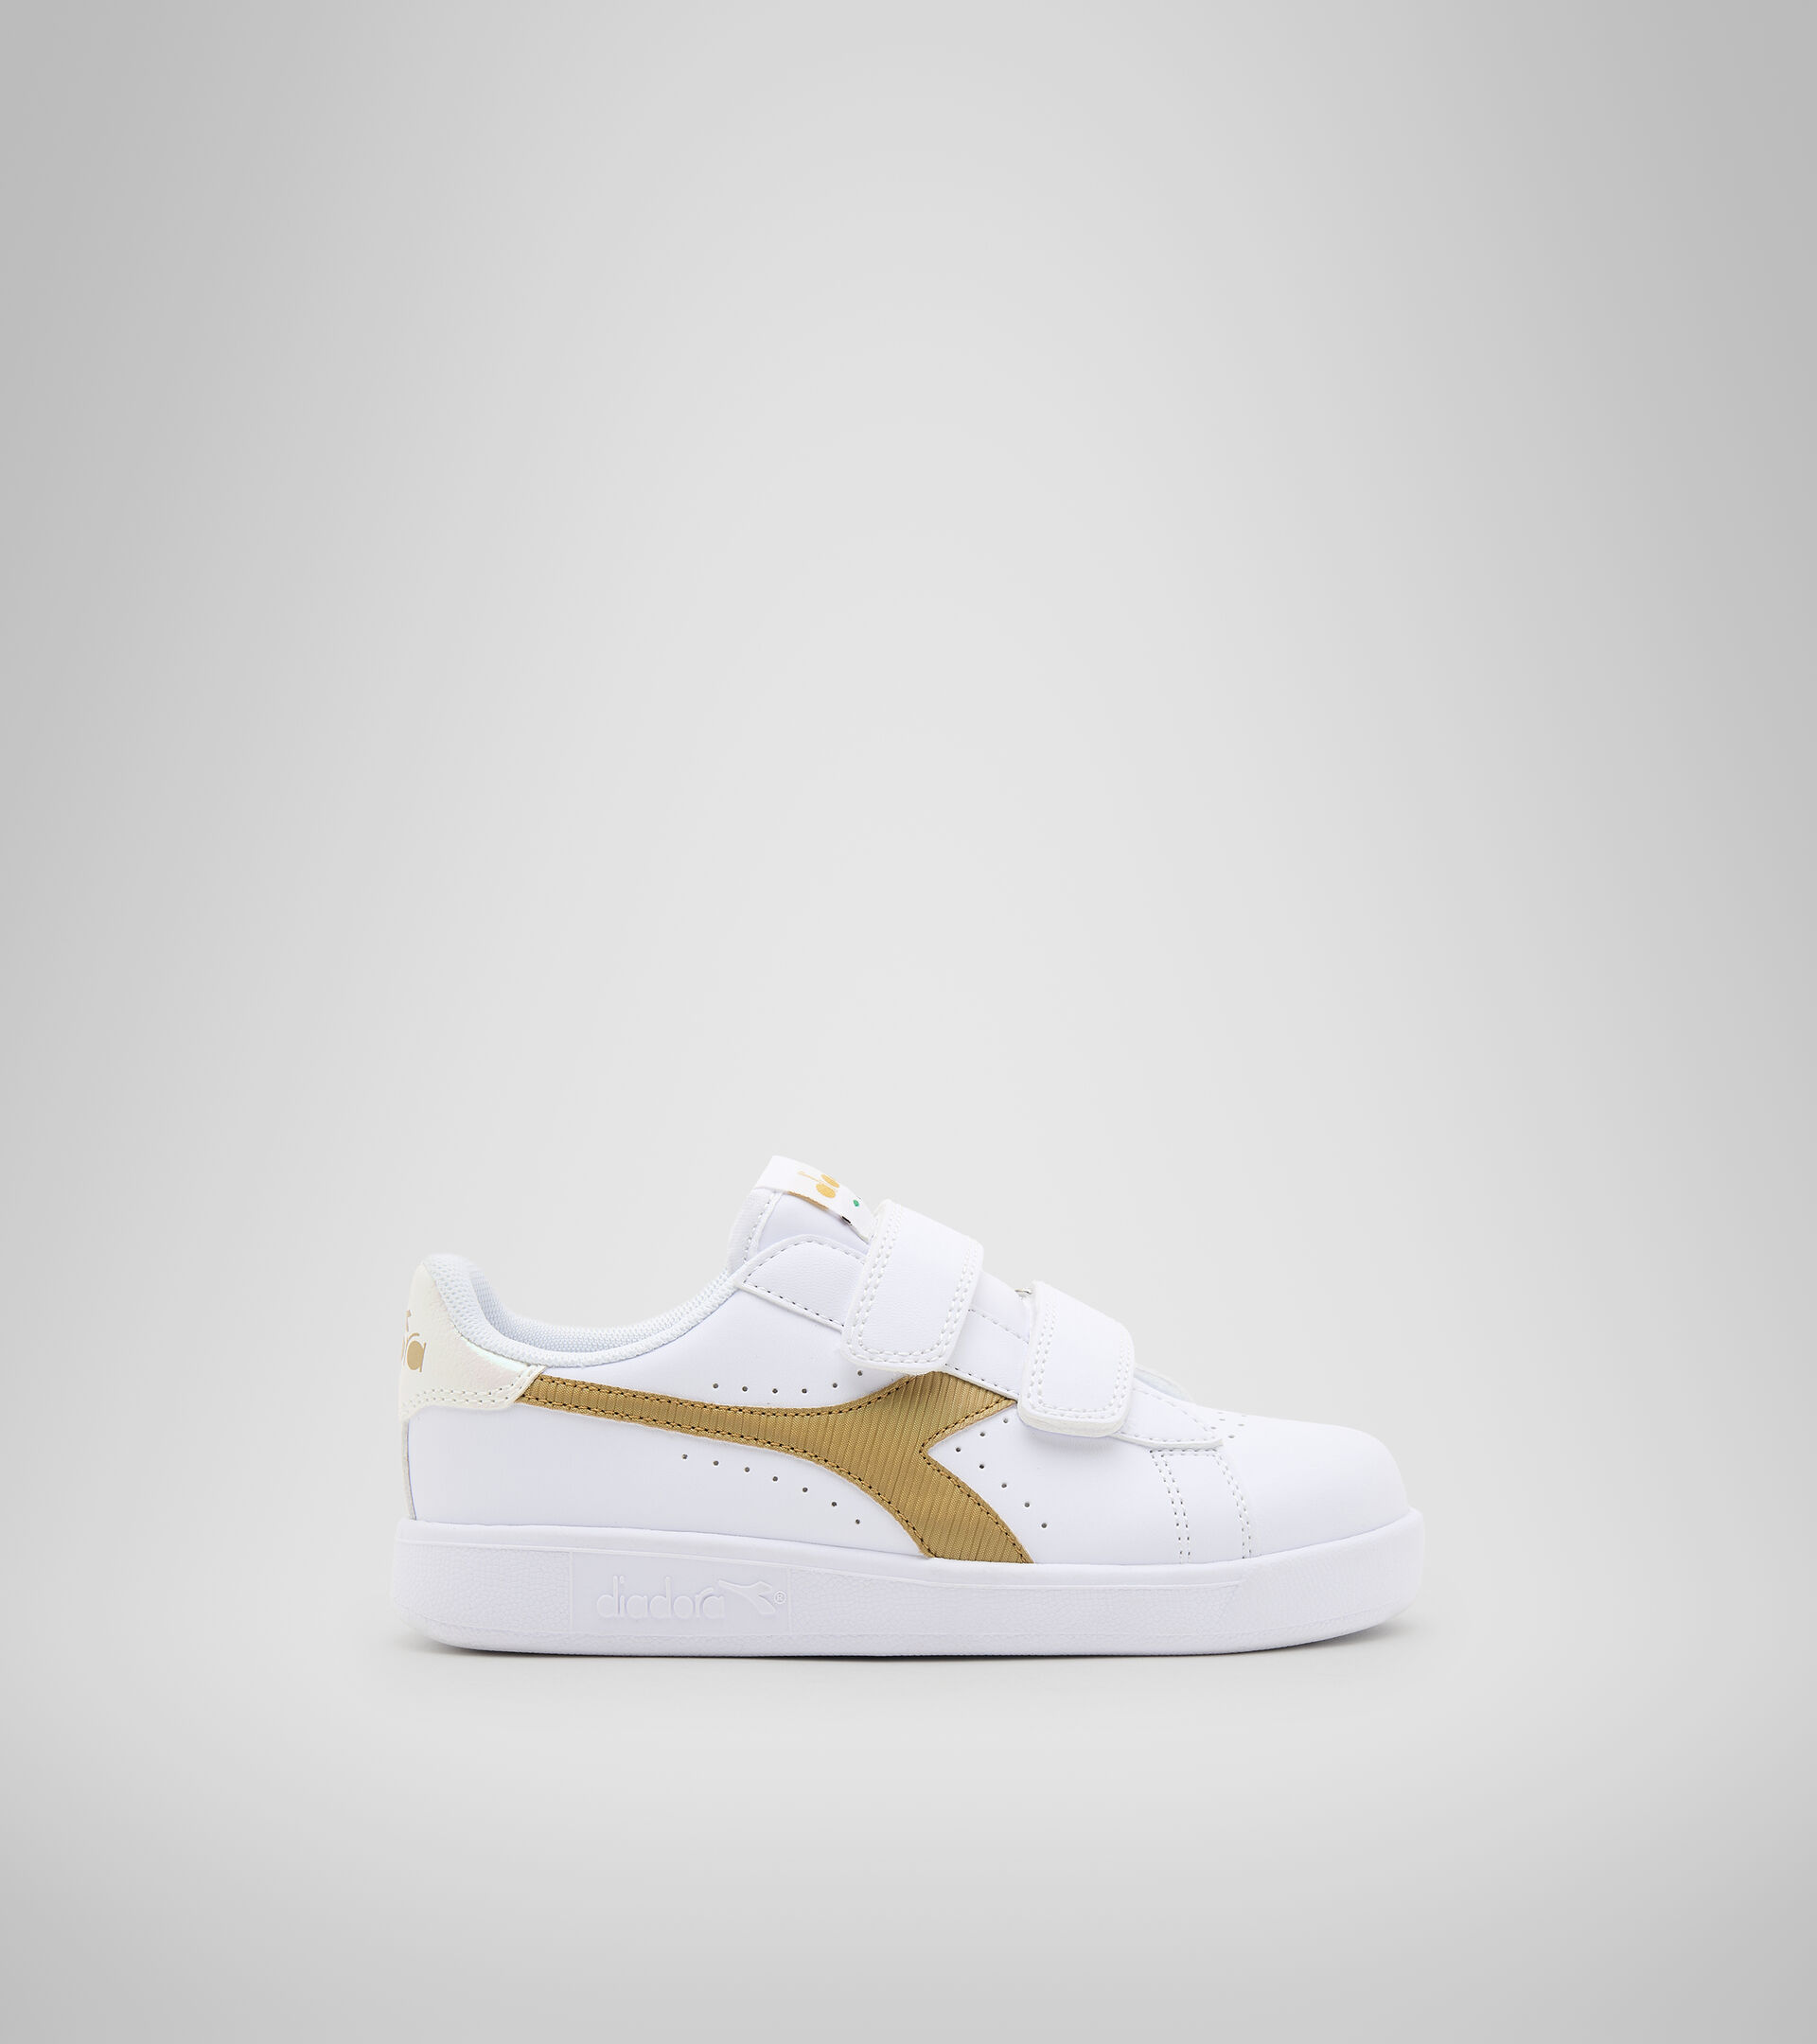 Sports shoes - Kids 4-8 years GAME P PS GIRL WHITE/GOLD - Diadora